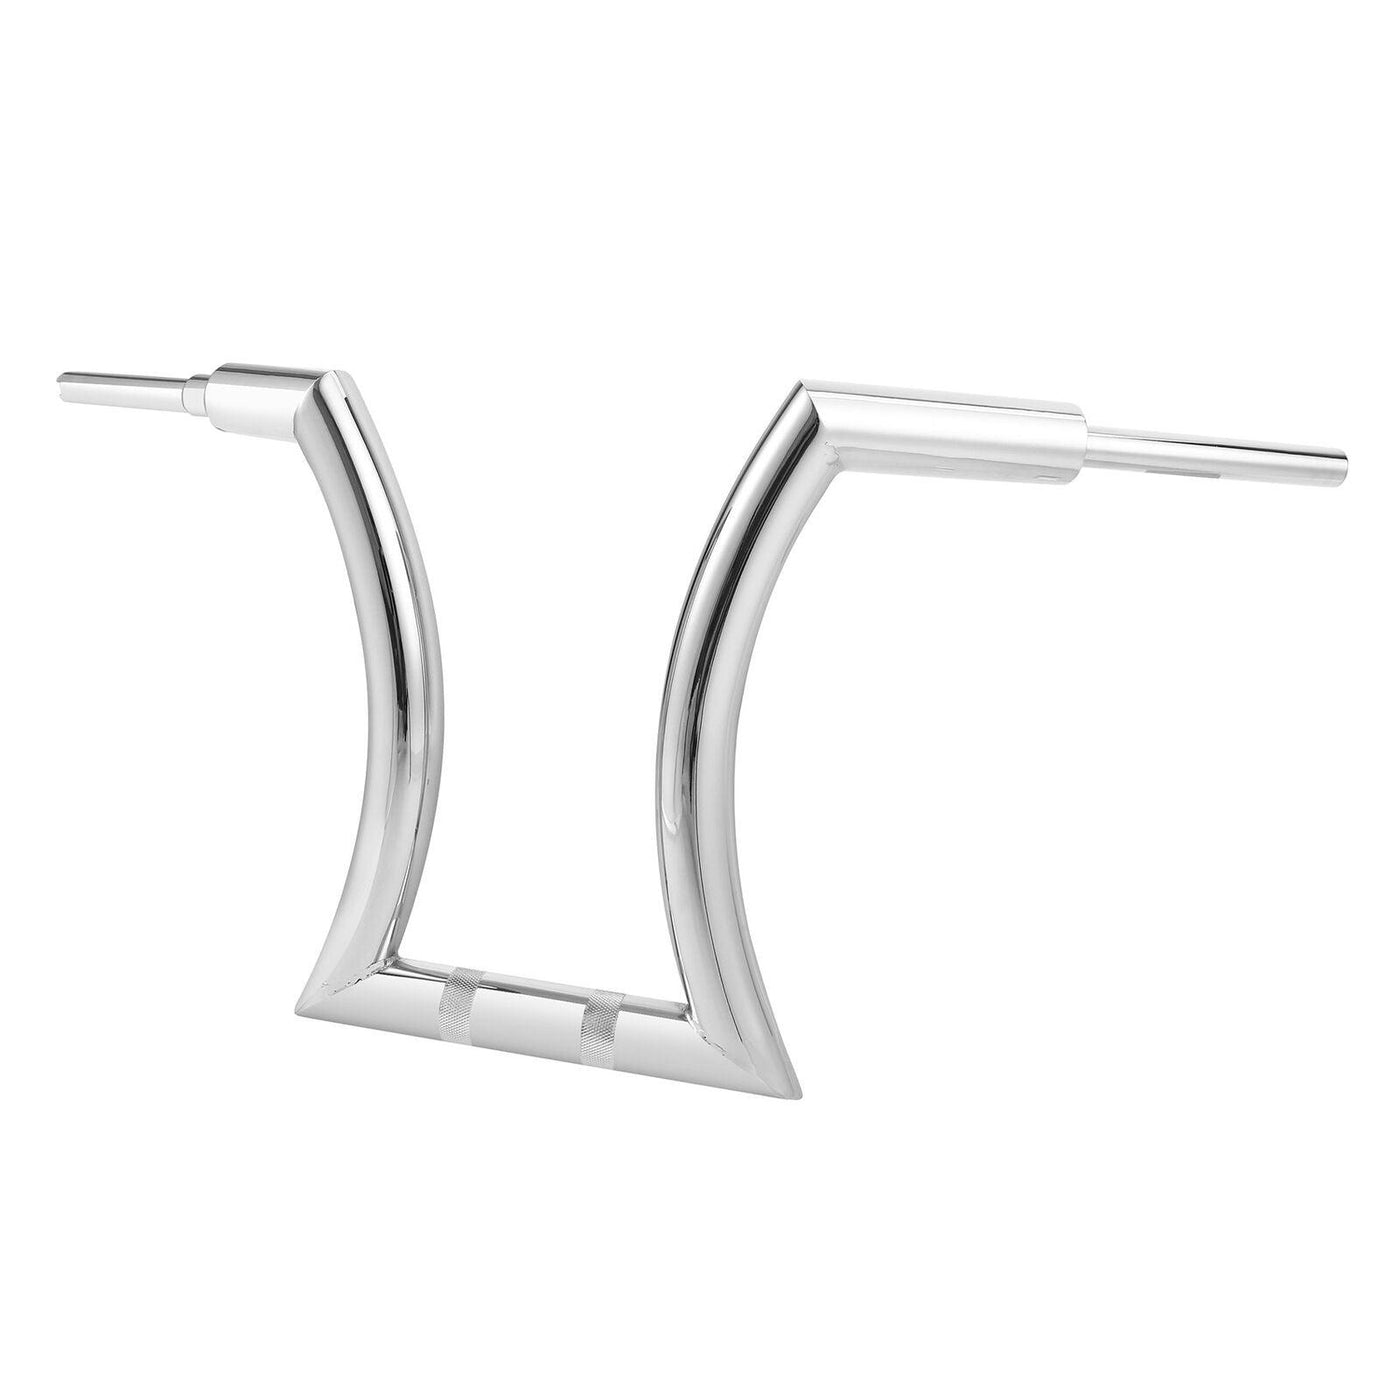 Chrome 18" Rise 2" Hanger Bar Handle Bar Fit For Harley Road King Softail - Moto Life Products